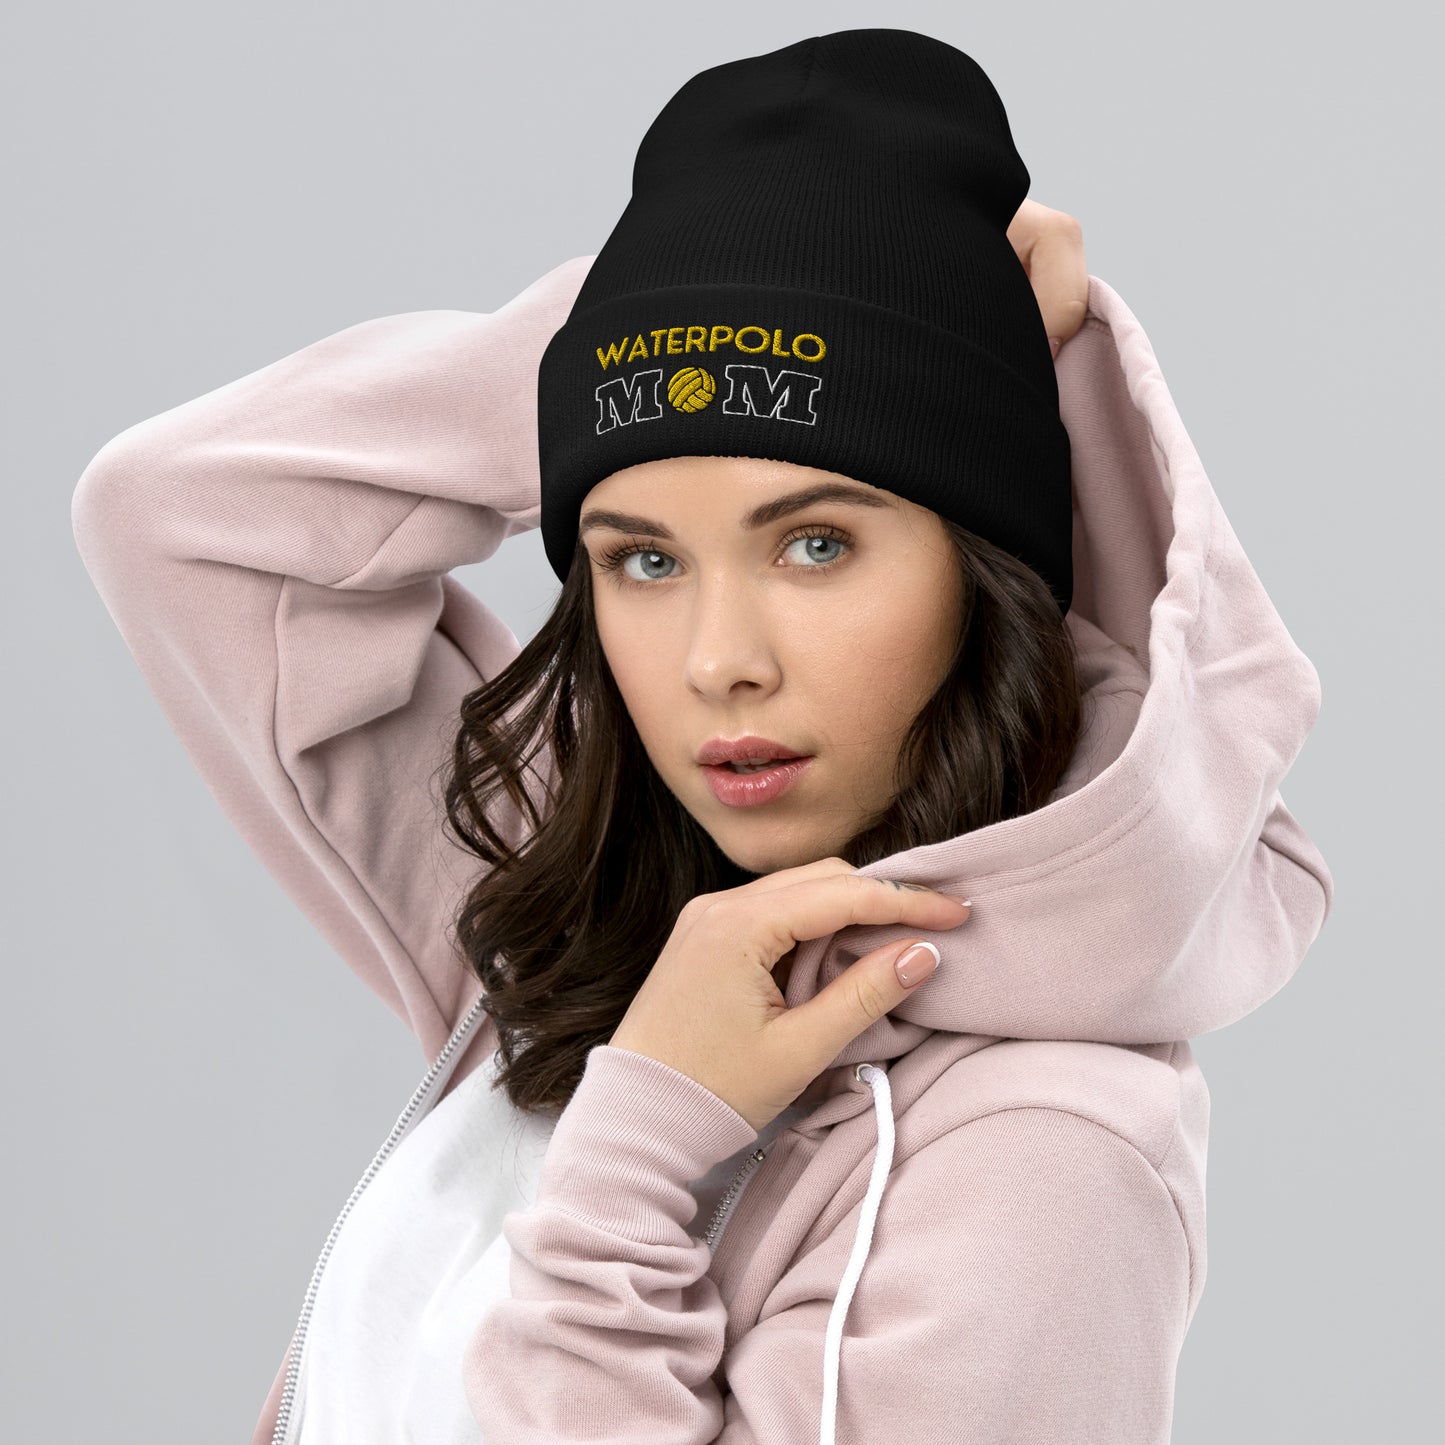 Waterpolo Mom Black Beanie with Yellow Lettering - Cuffed Beanie